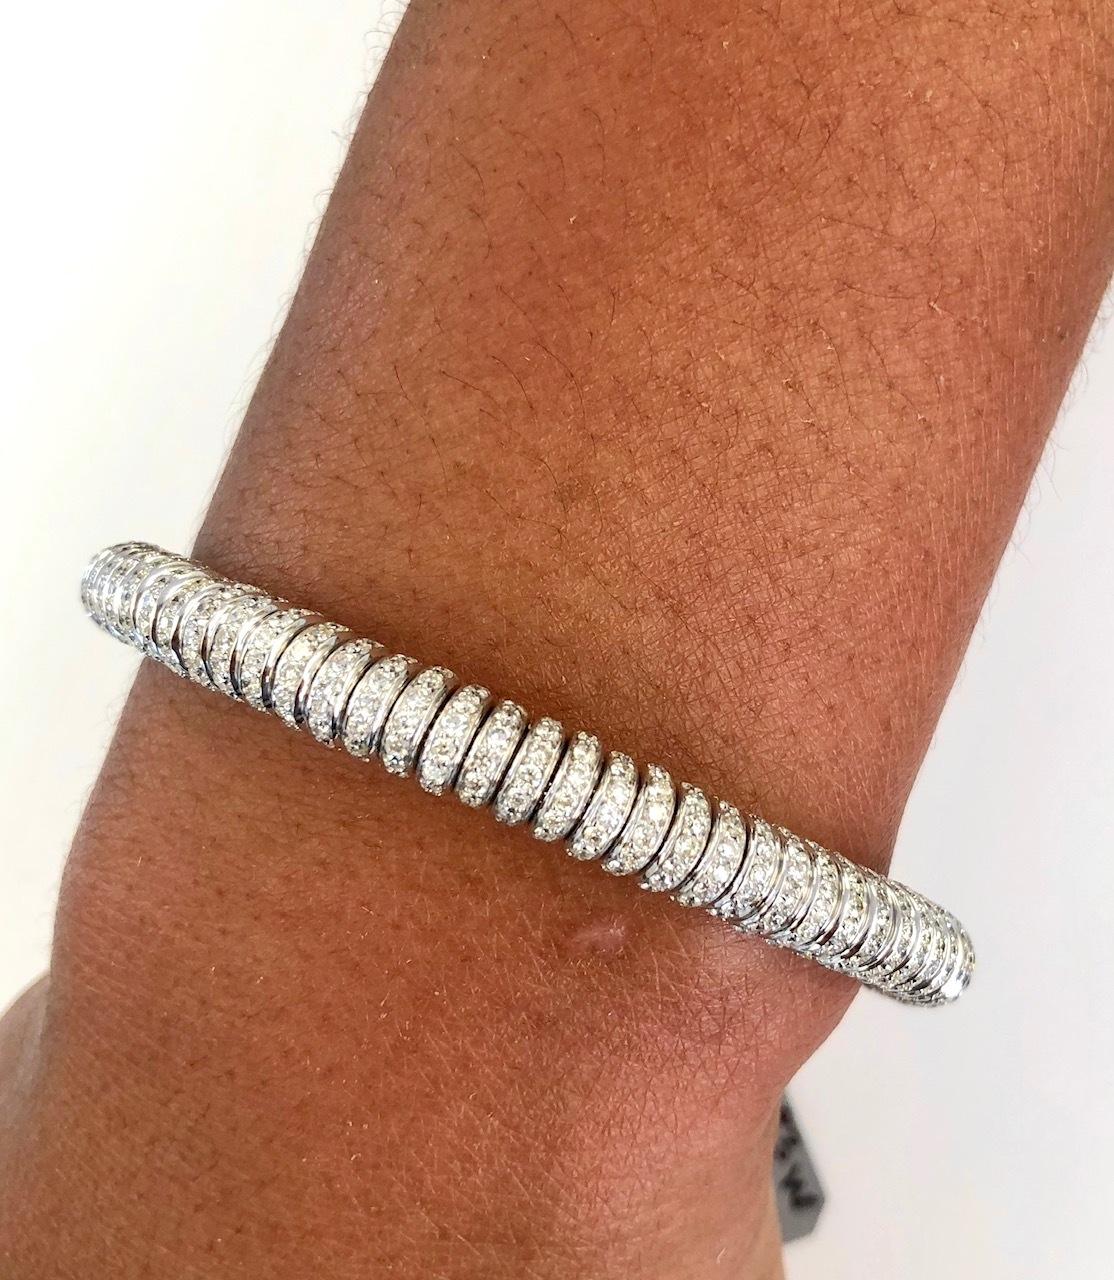 This design of a Bangle Bracelet is the softest and most comfortable on the wrist, made with our proprietary inner Gold Spring, and due to the tubular design, it makes this feel so good to wear. We offer it in 18K White, or Yellow or Pink Gold each